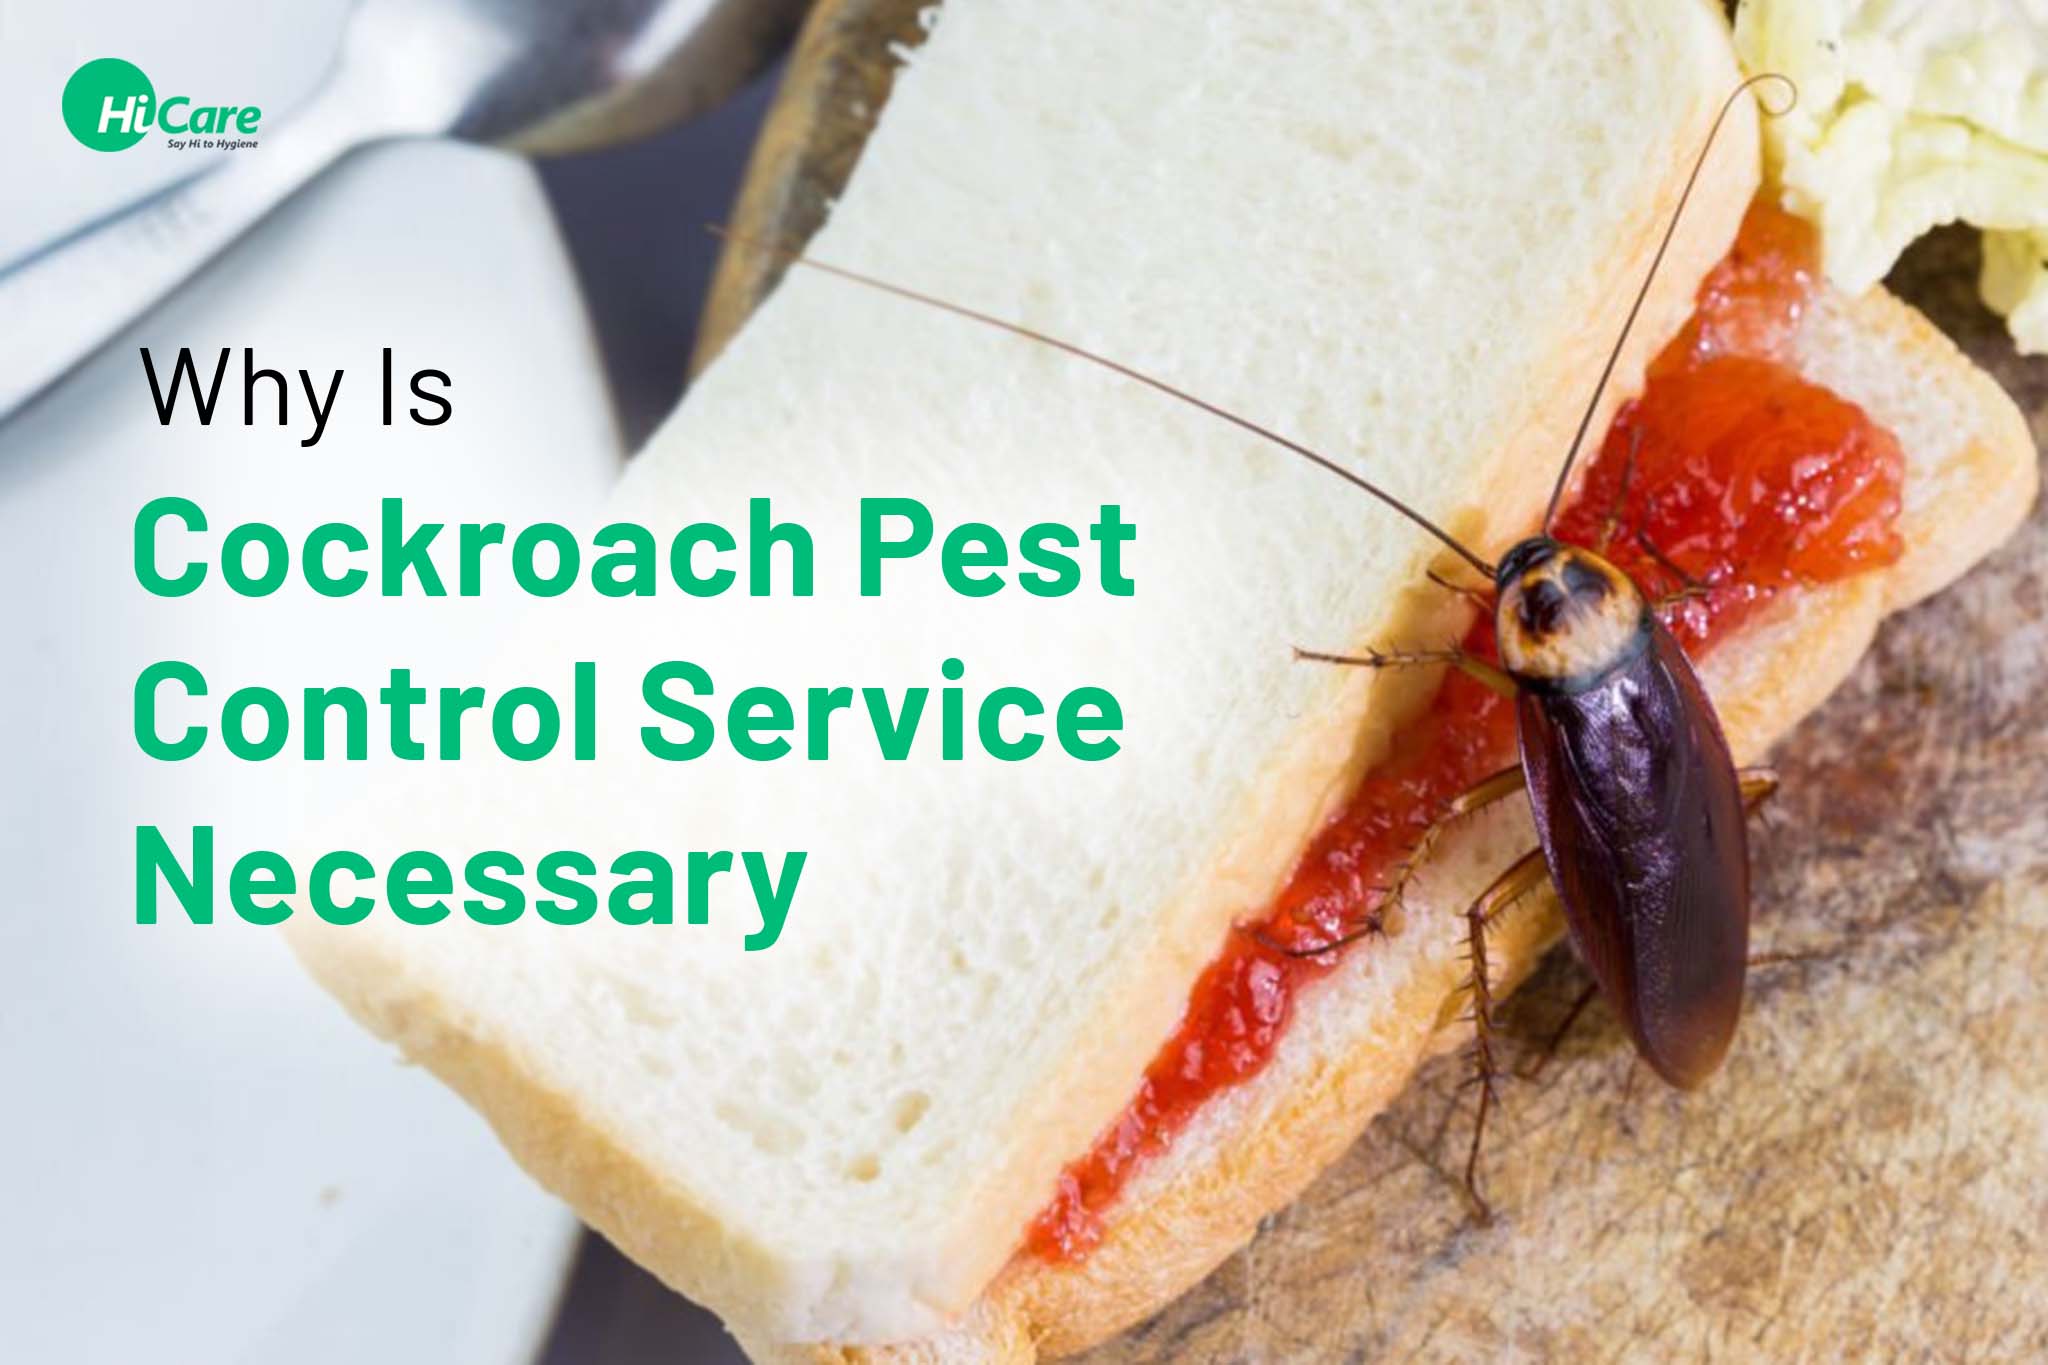 Why Is Cockroach Pest Control Service Necessary? | HiCare